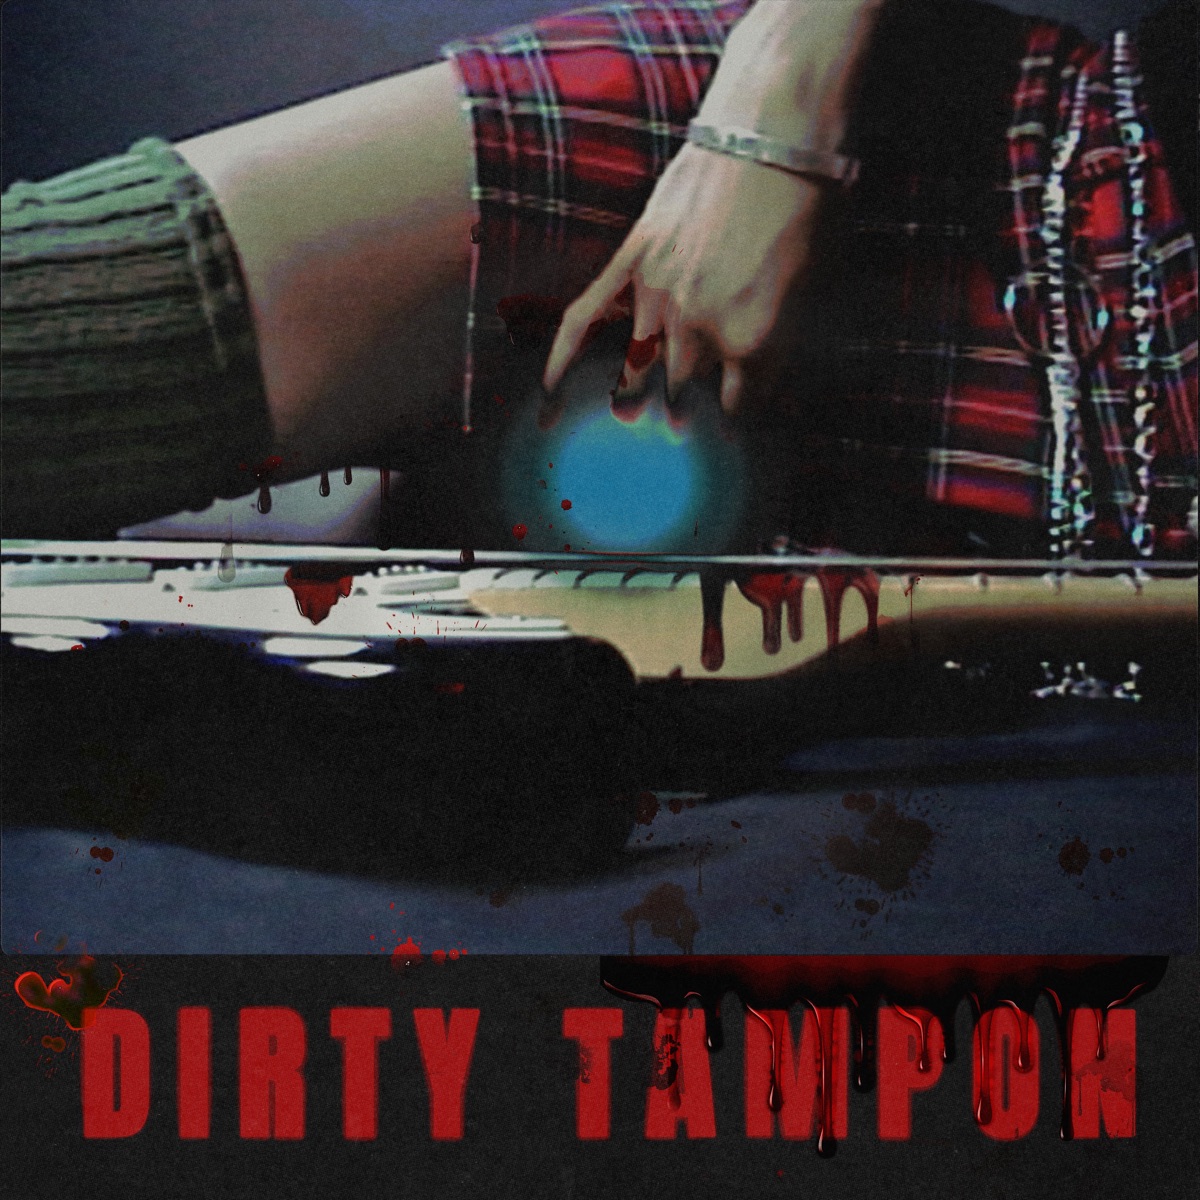 Dirty Tampon - Single - Album by Troi Irons - Apple Music